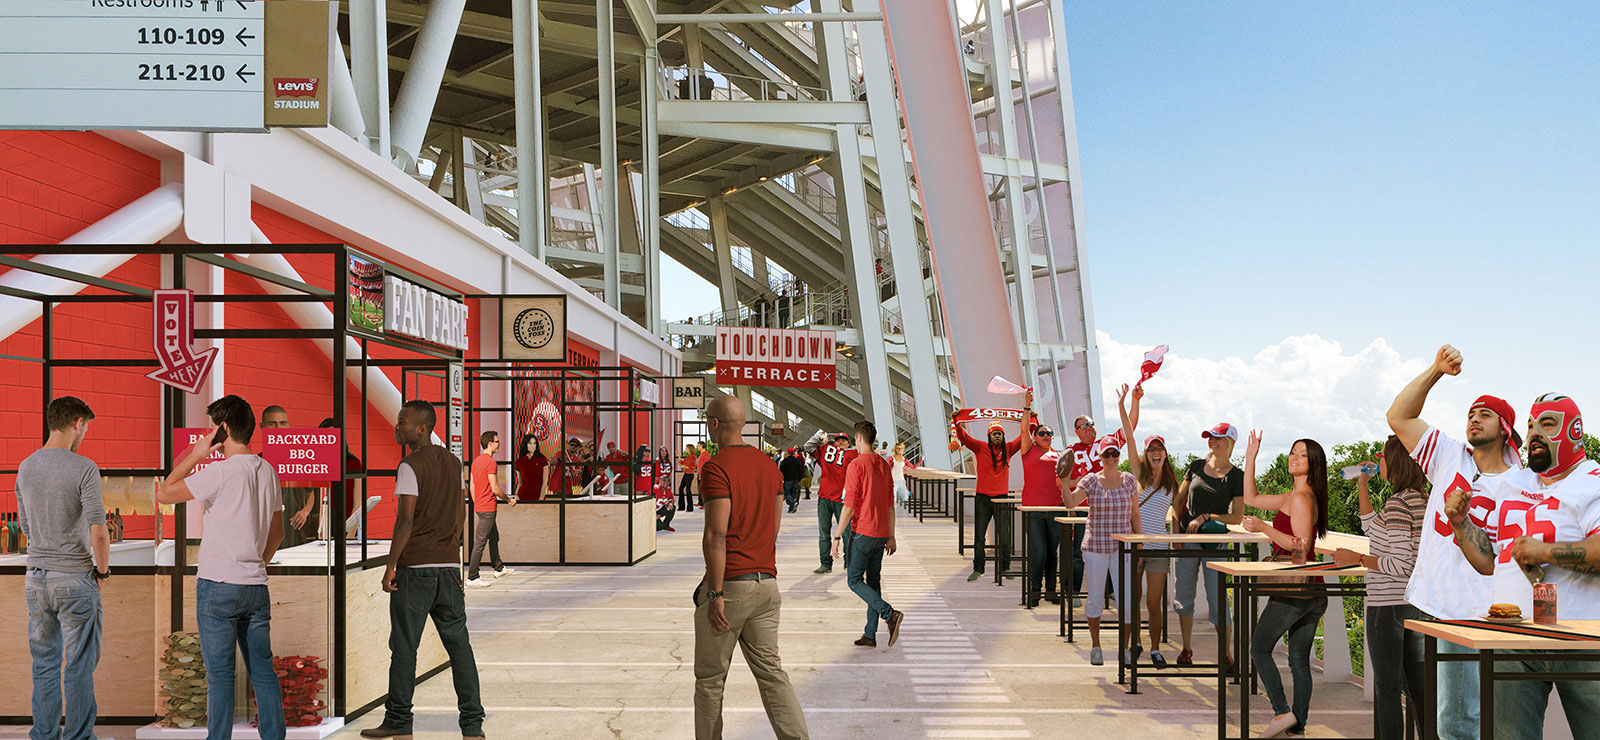 Levi's® Stadium and Levy Expand Dining Options, Introduce Touchdown Terrace  - Levi's® Stadium